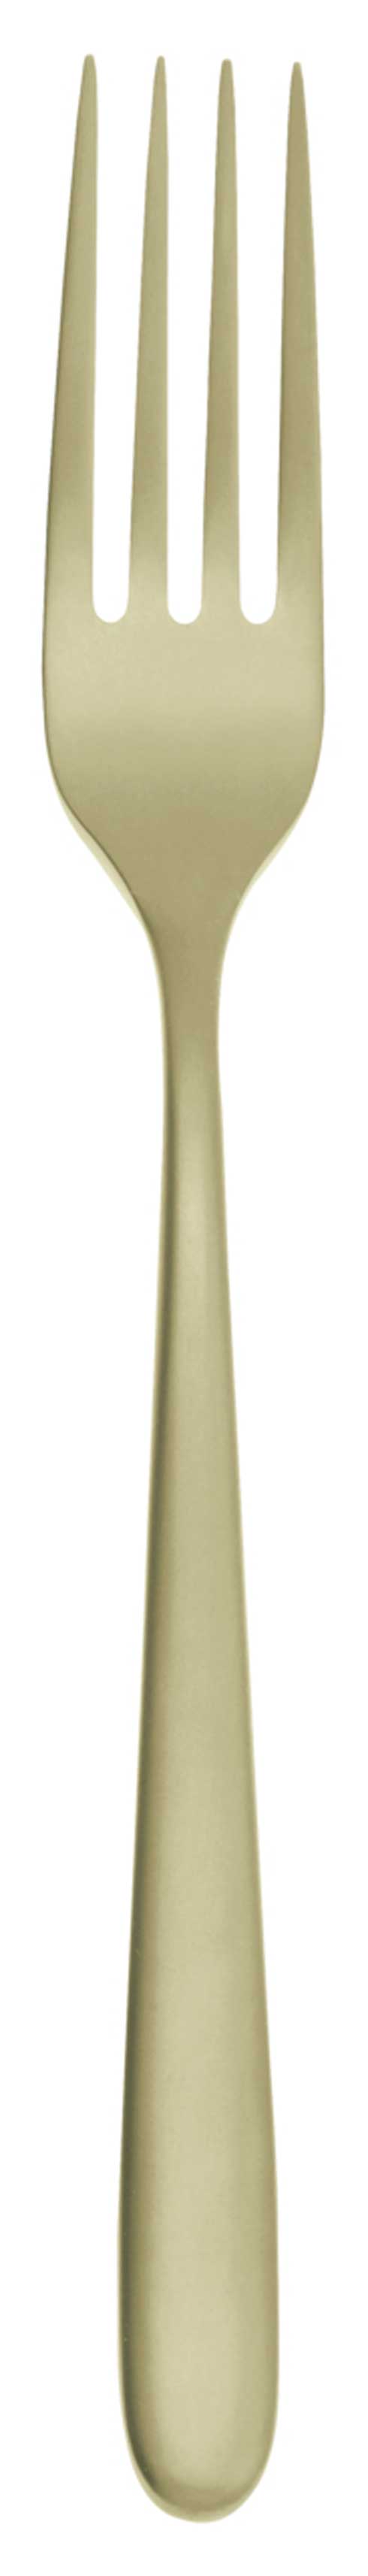 $57.00 Champagne Antico - Serving Fork 18/10 s/s Sand Blasted Finish - PVD Champagne